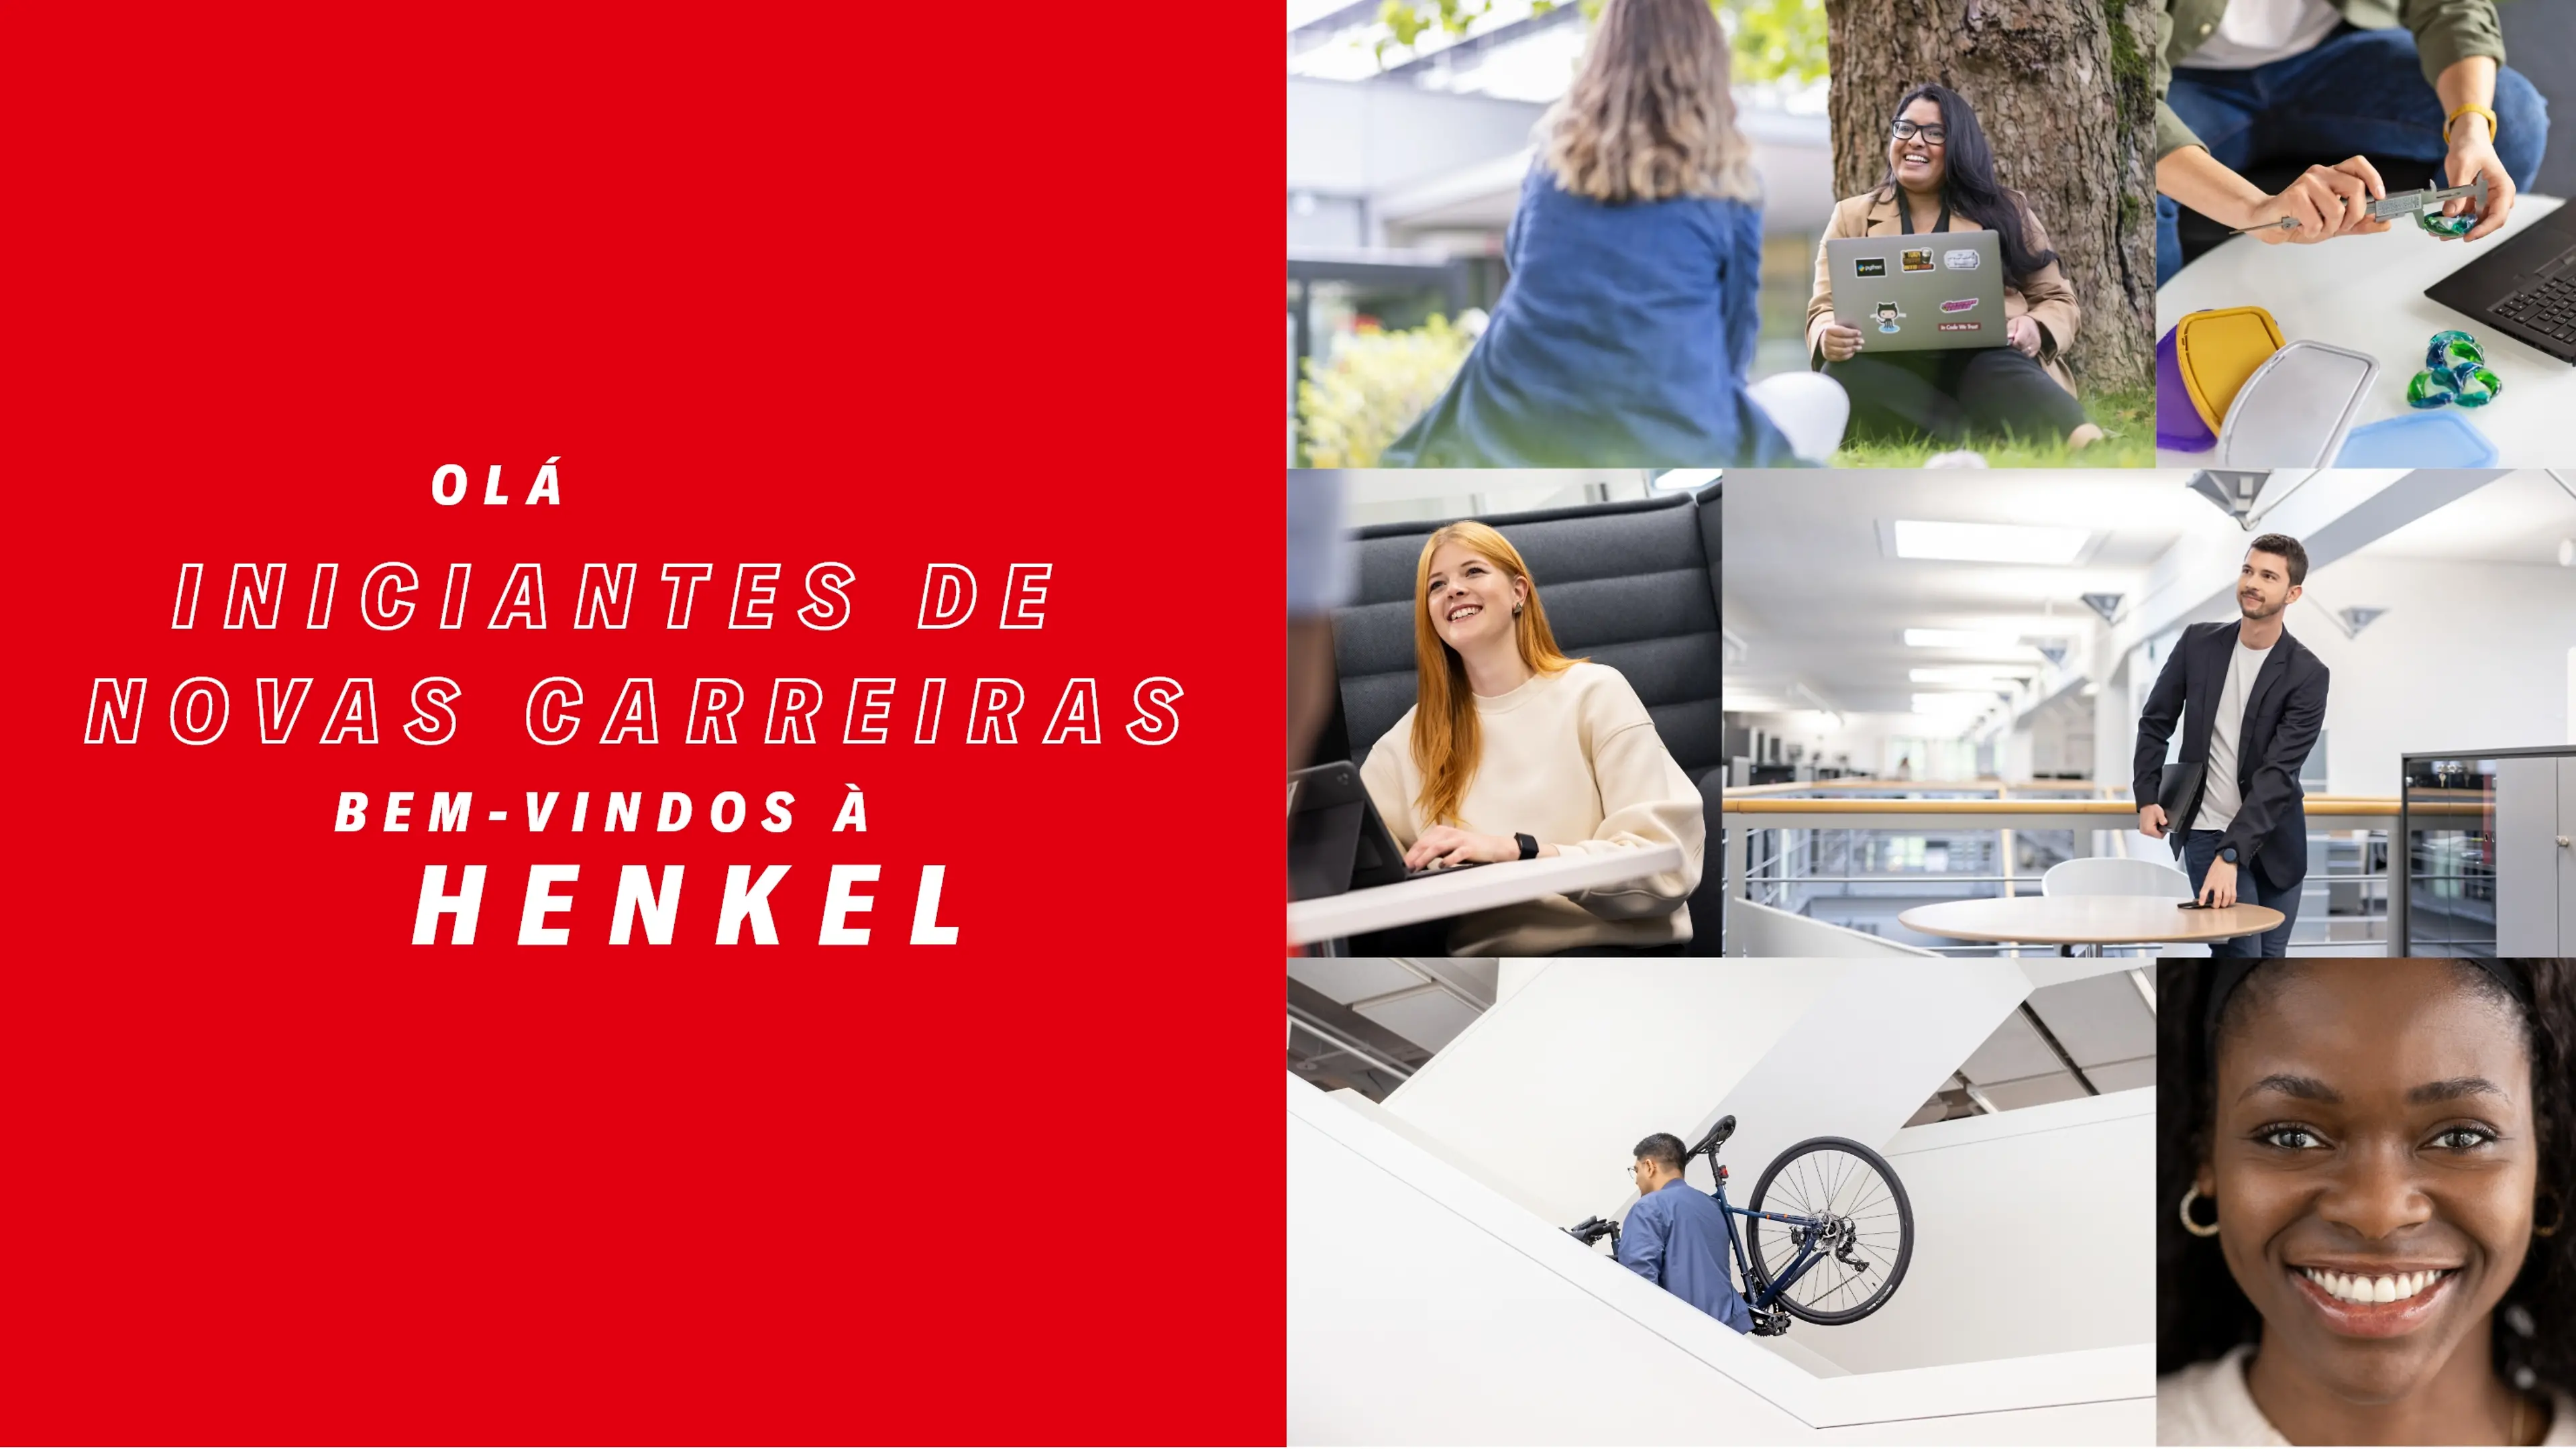 Various Henkel employees portrayed in action and in different working environments.